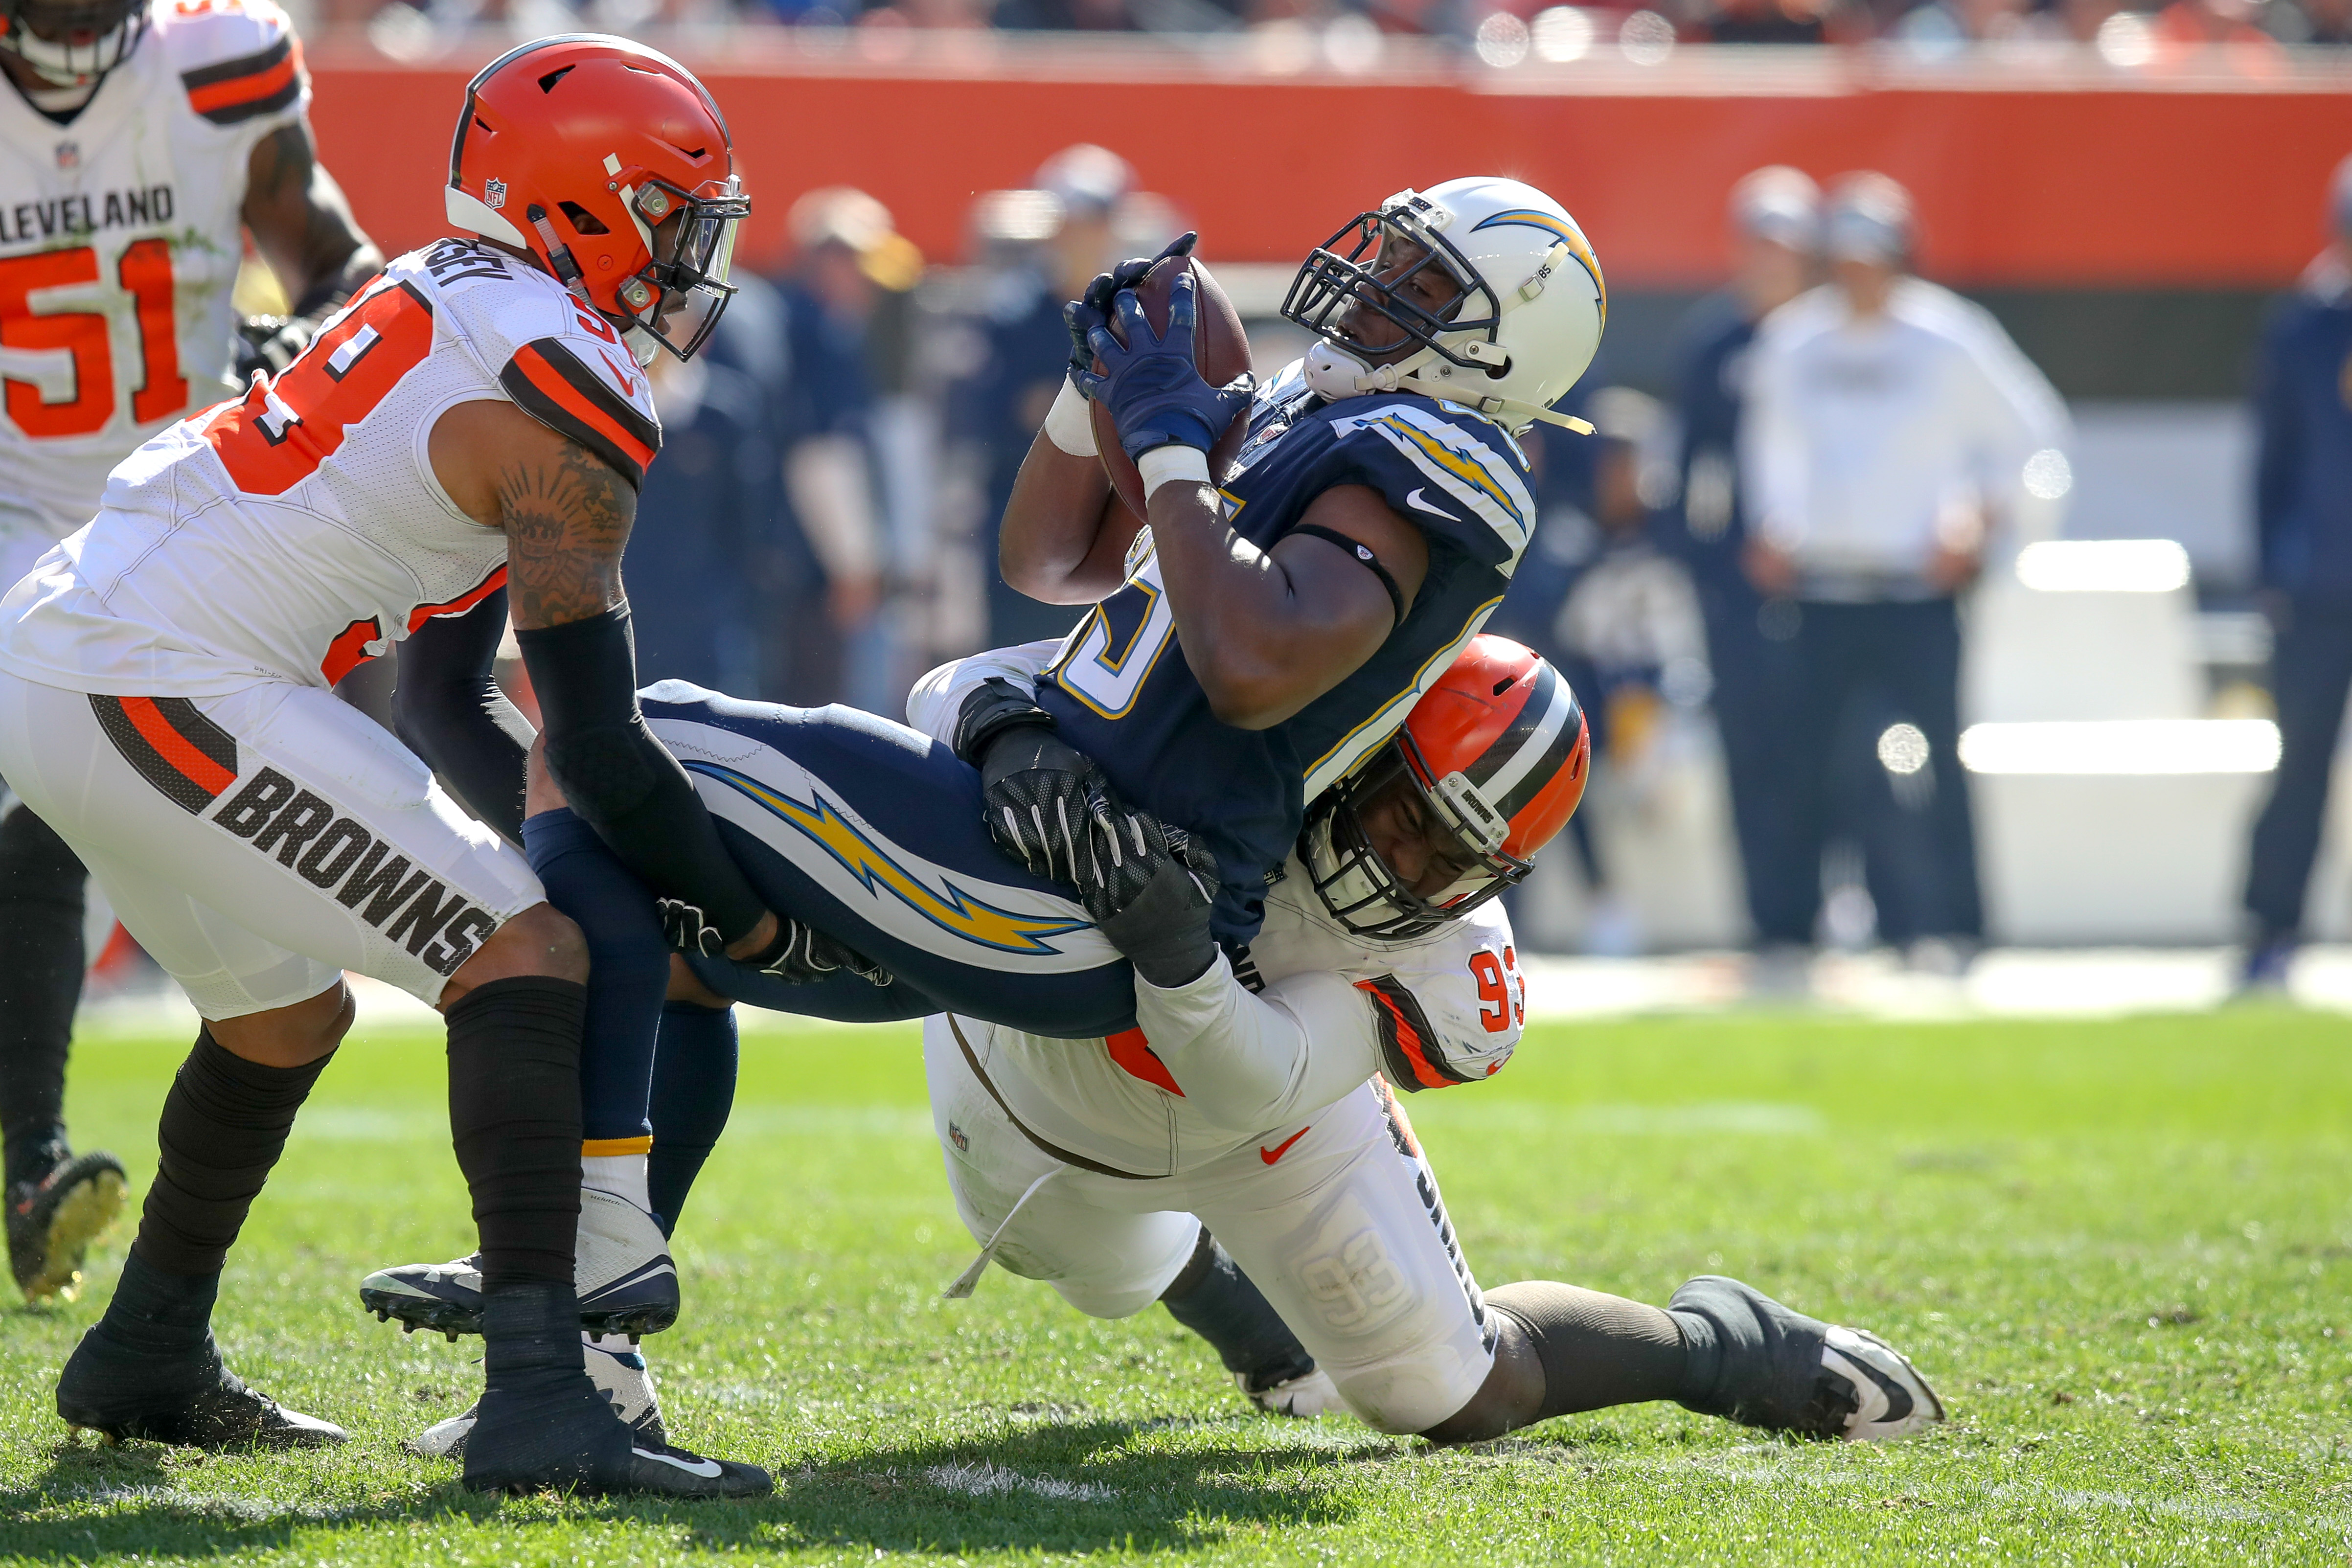 NFL: OCT 14 Chargers at Browns